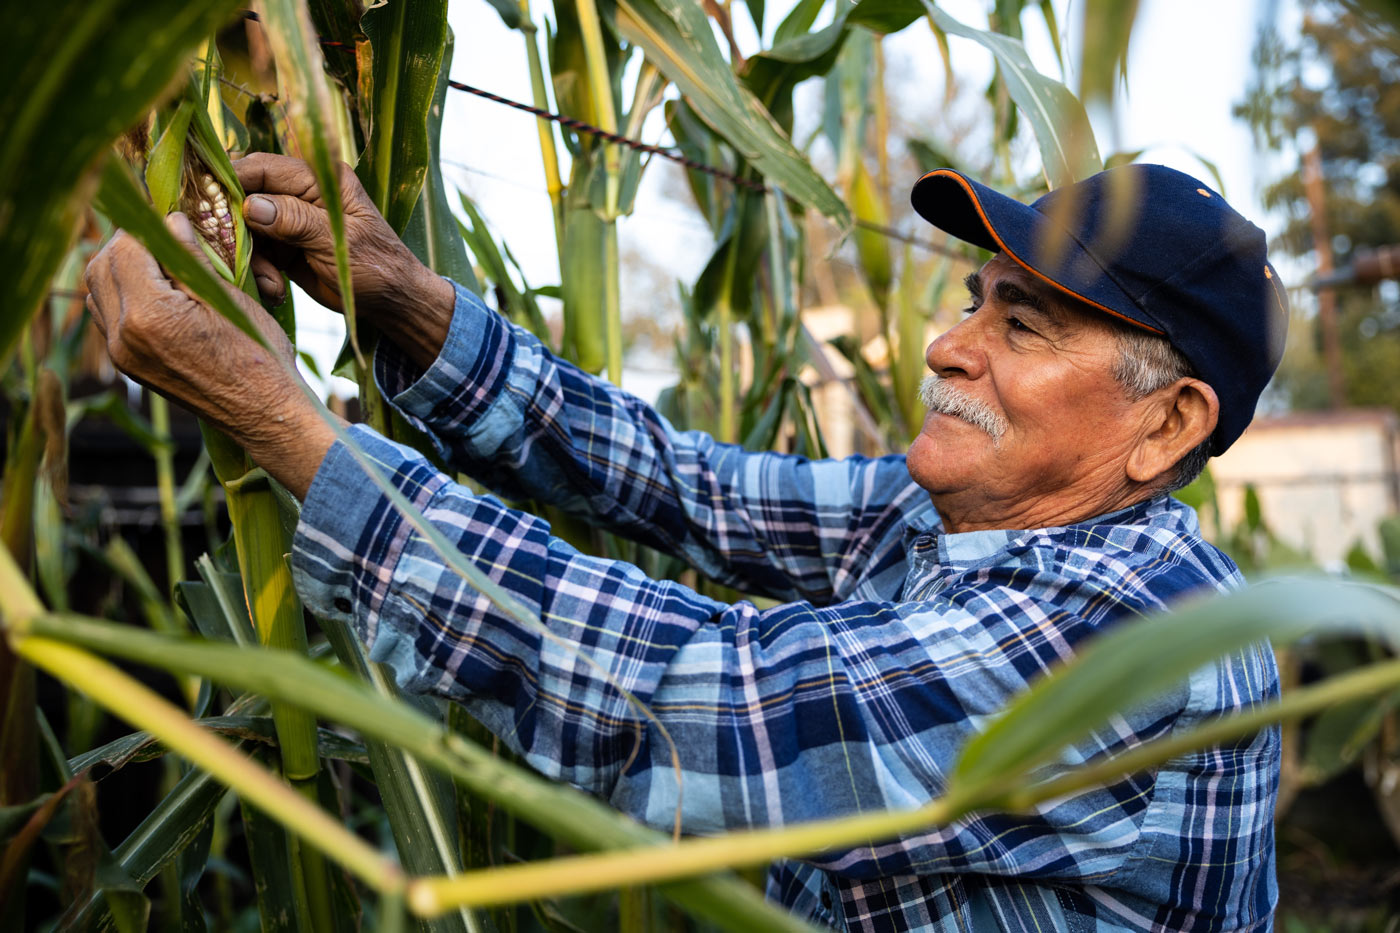 Alberto Dolores inspects corn that he grows in his backyard in Fuller Acres.